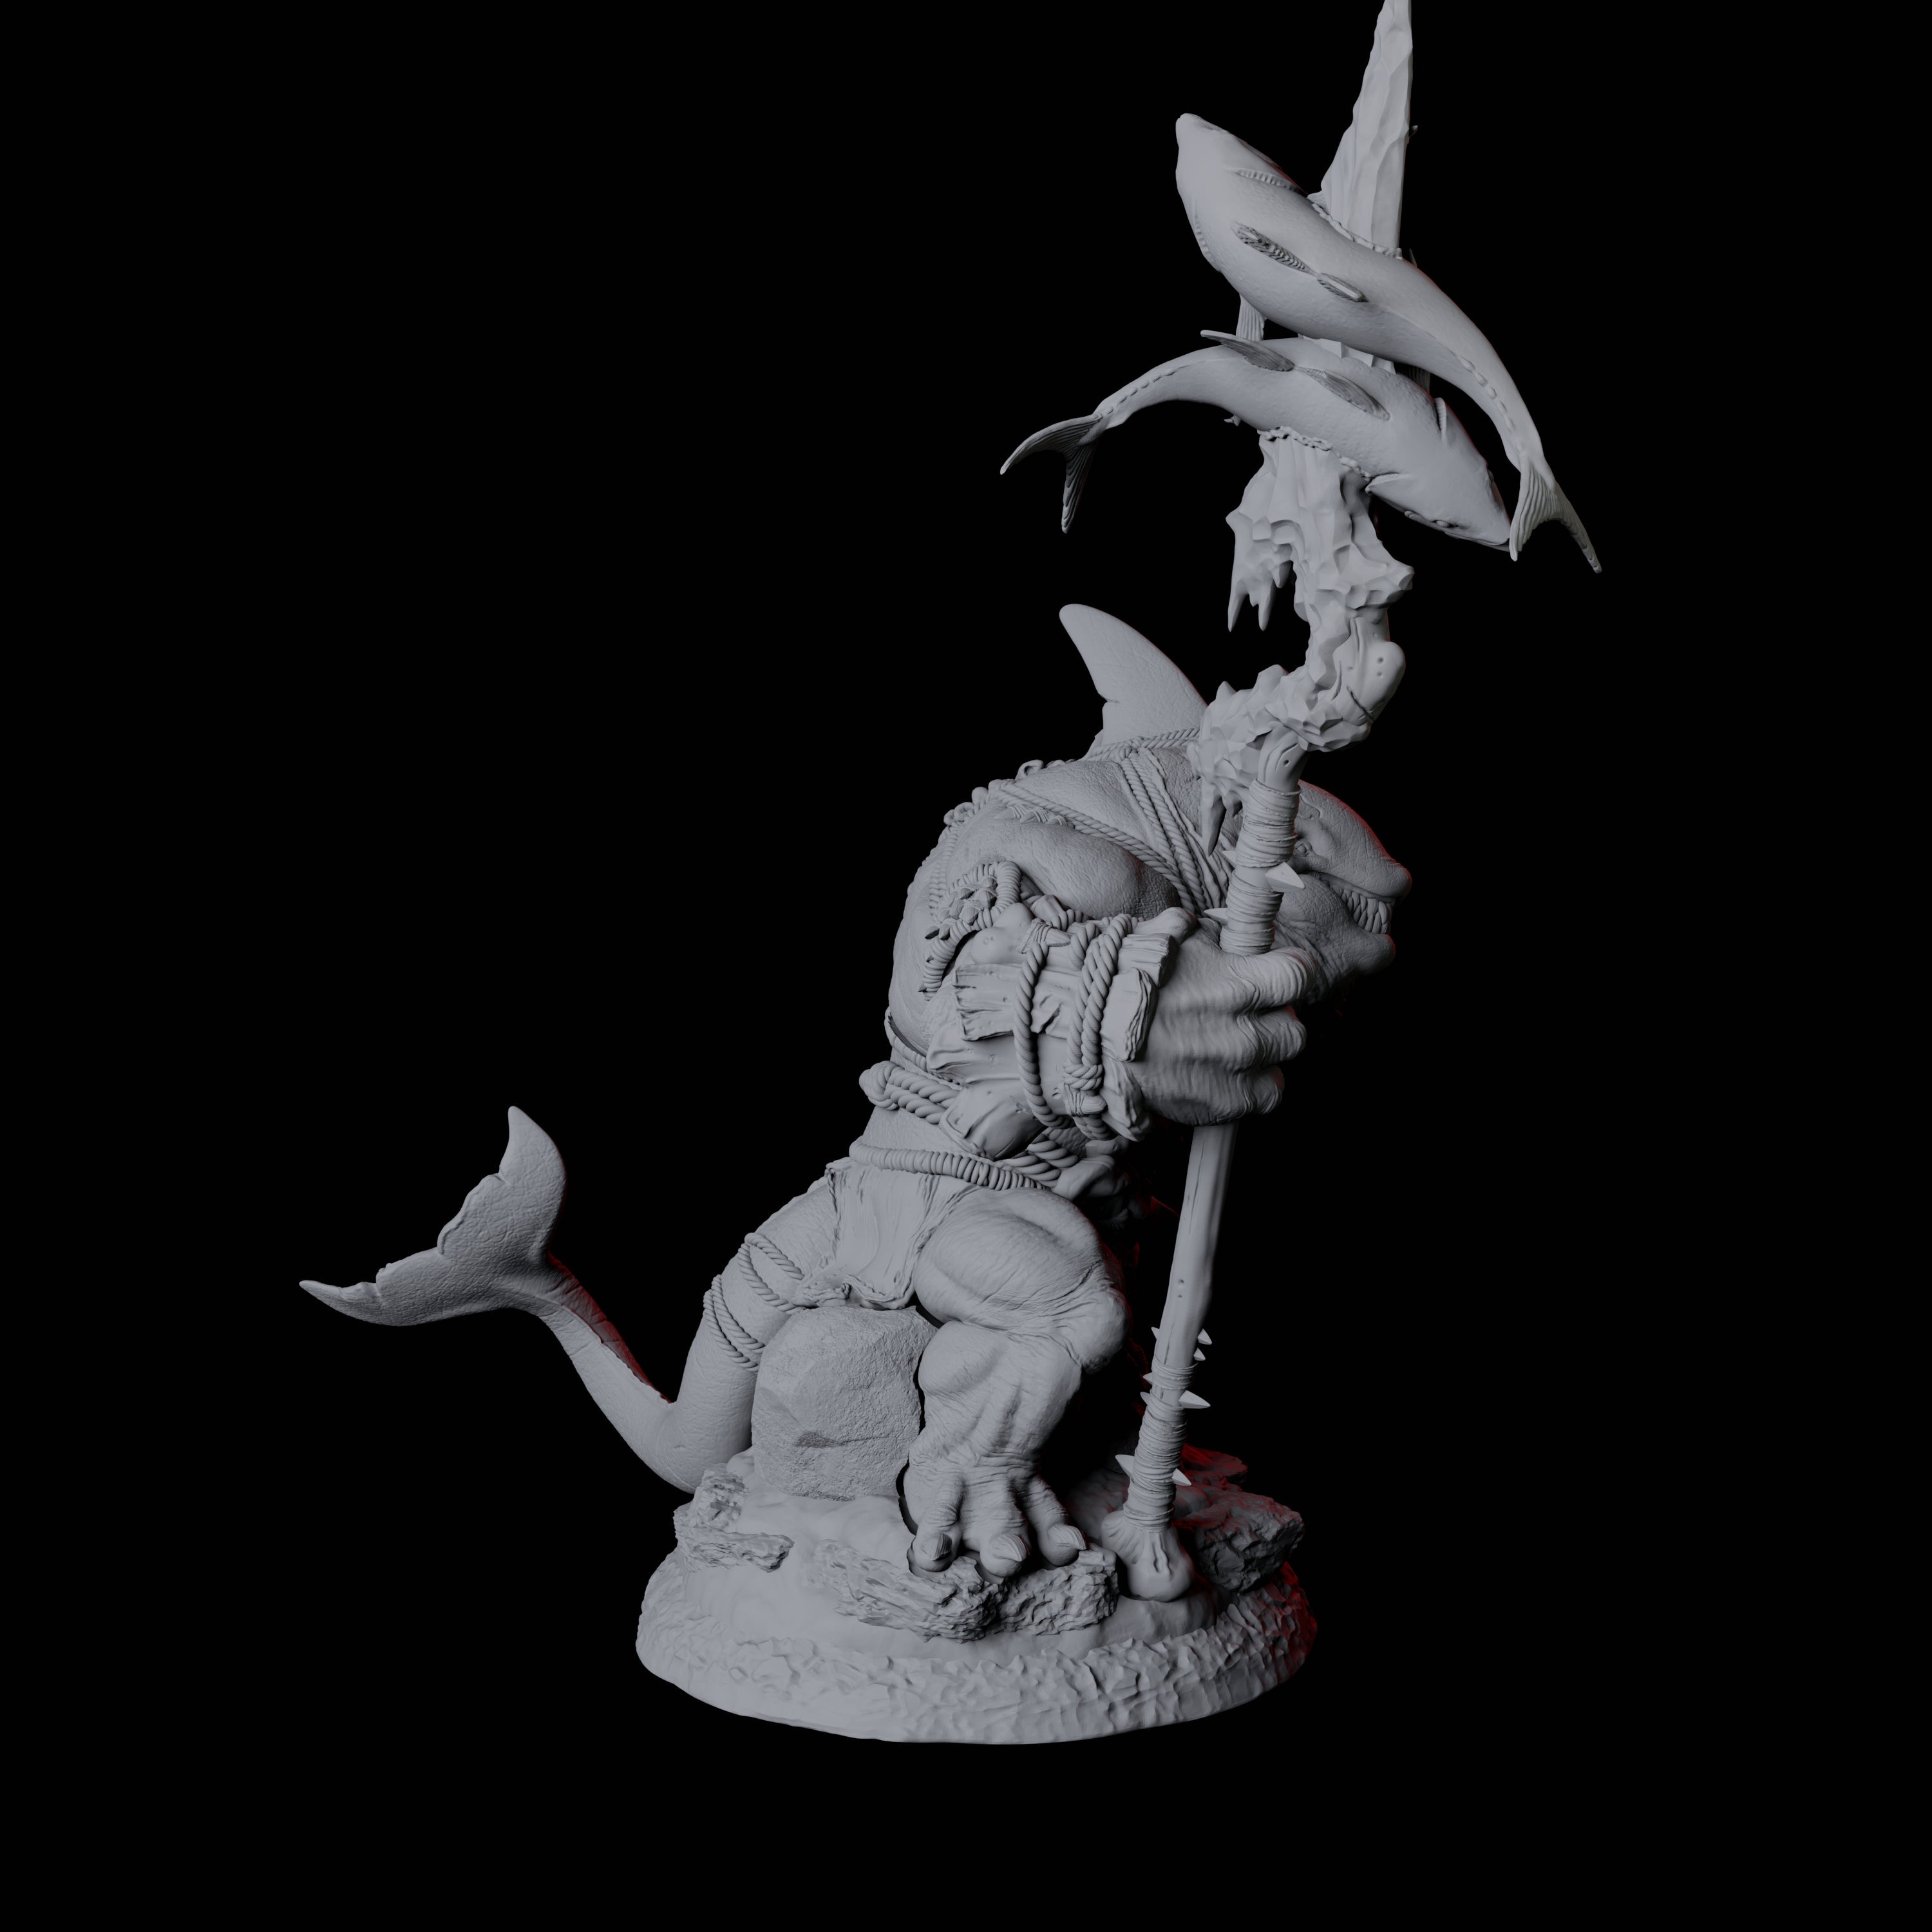 Graceful Orcafolk Warrior C Miniature for Dungeons and Dragons, Pathfinder or other TTRPGs